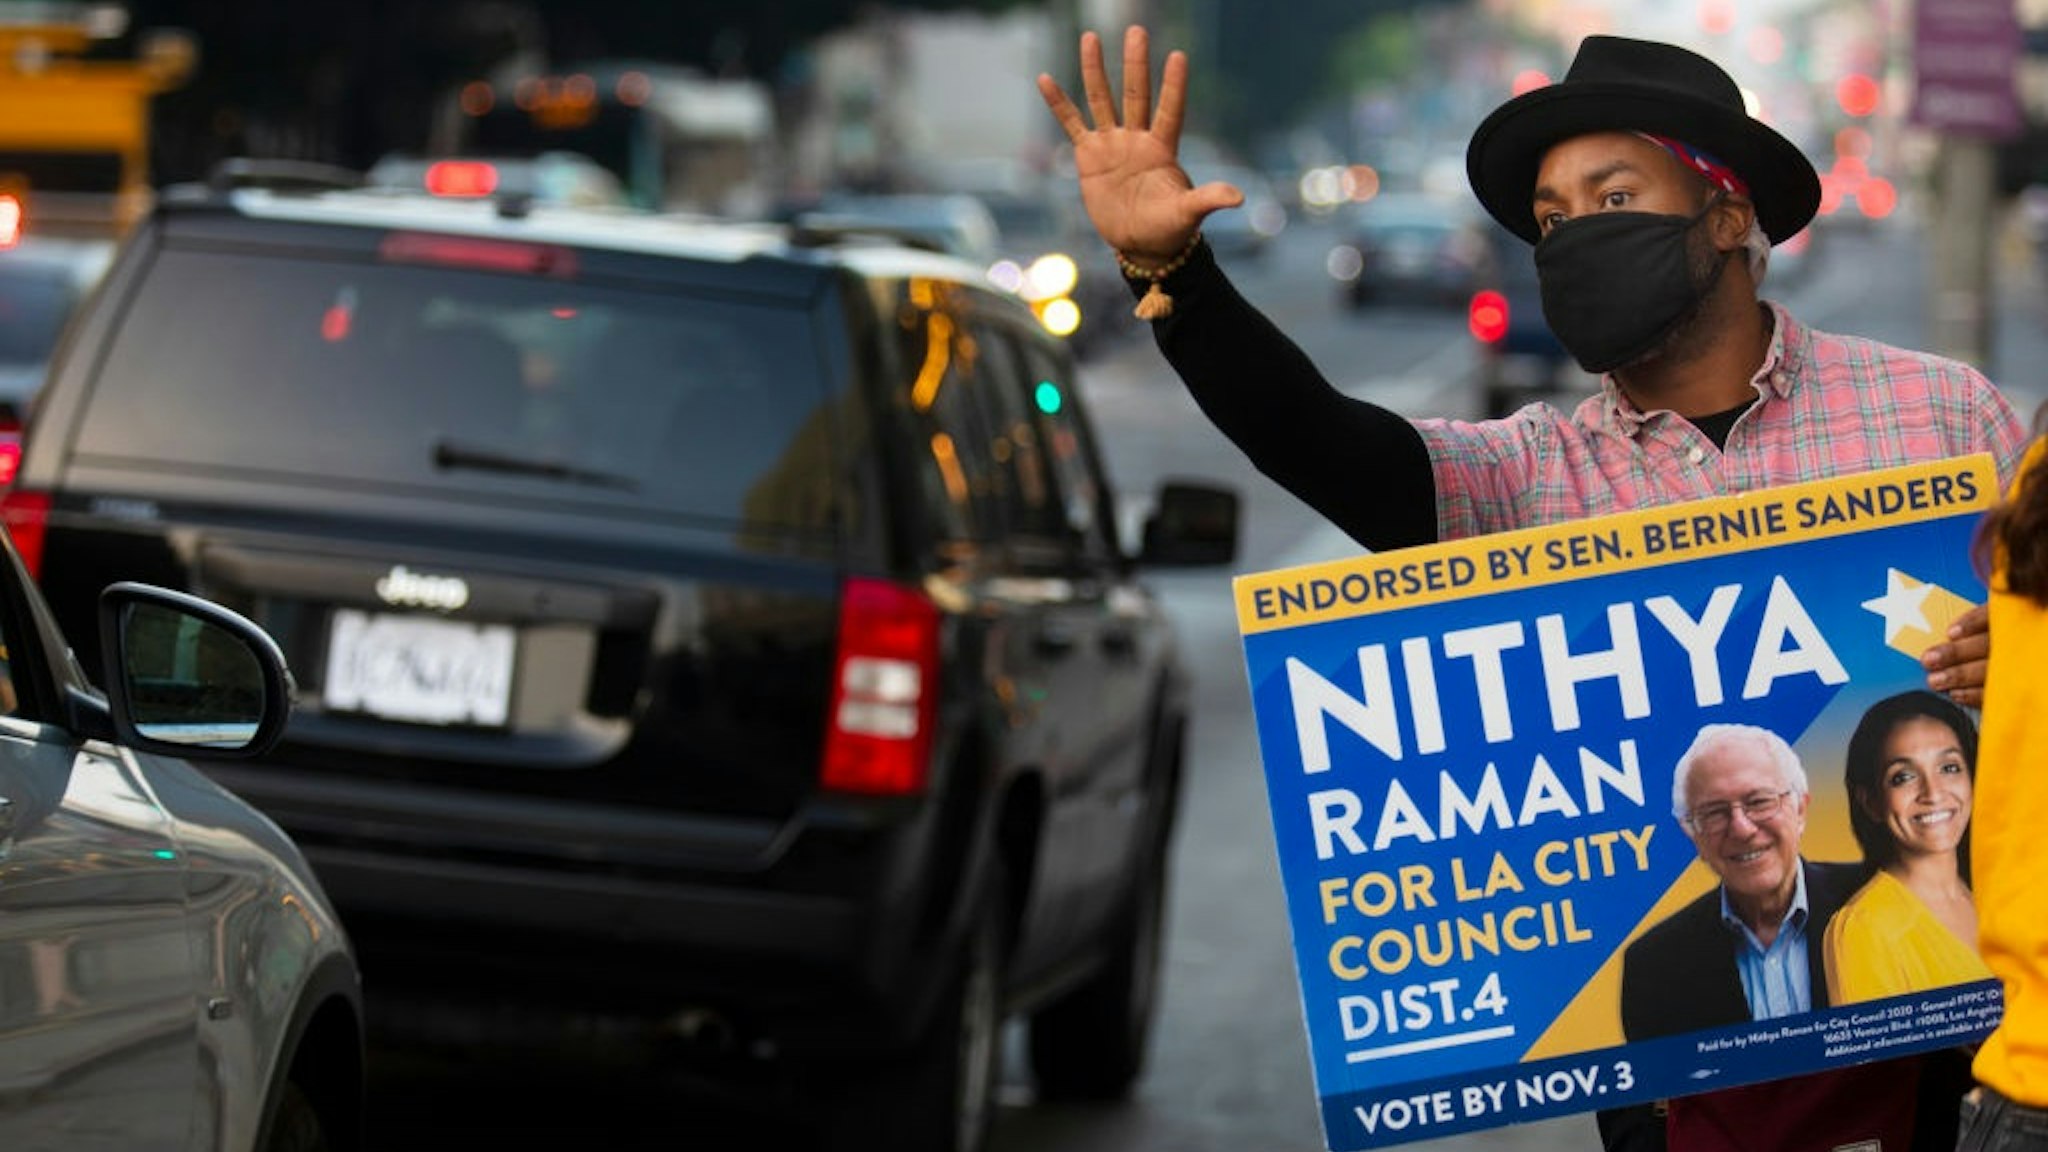 LOS ANGELES, CA - NOVEMBER 03: As the sun begins to set Matthew Gaston, 37, of Los Angeles, holds up a vote sign for Nithya Raman for LA City Council down the street from a voting center inside The Wiltern on election day on Tuesday, Nov. 3, 2020 in Los Angeles, CA.